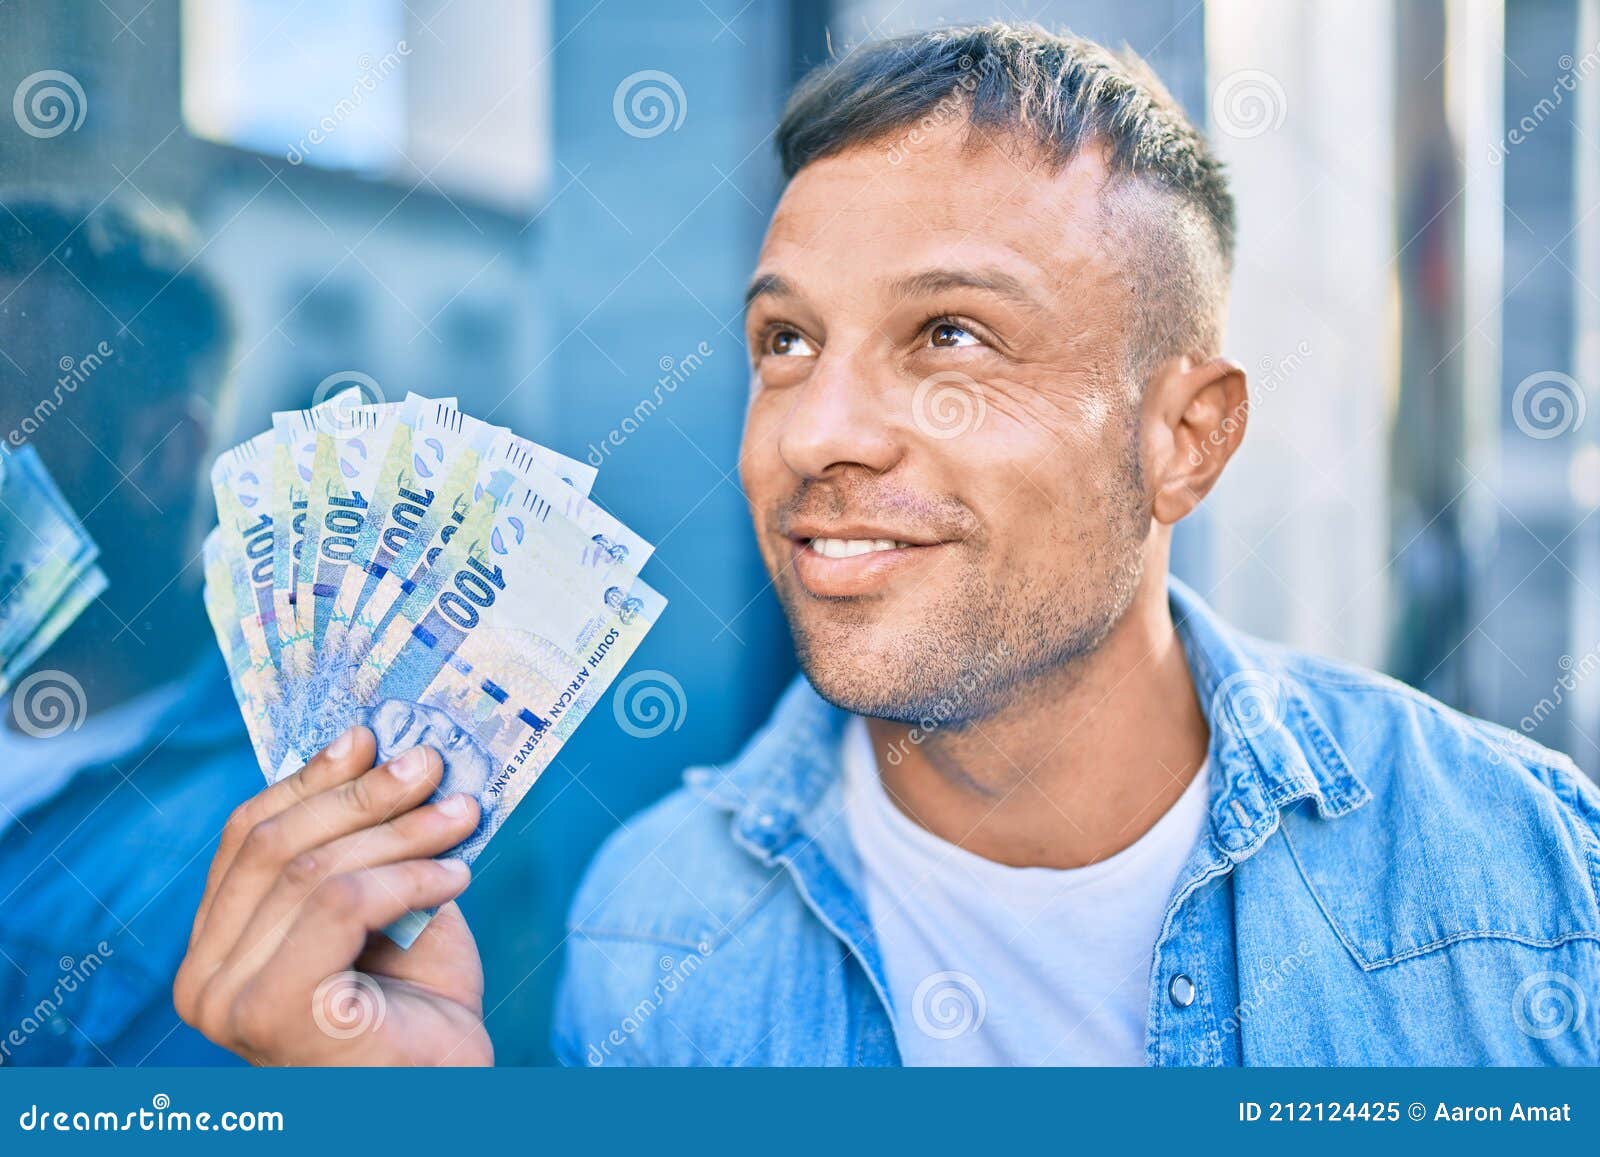 young caucasian man smiling happy holding south african rands banknotes standing at the city